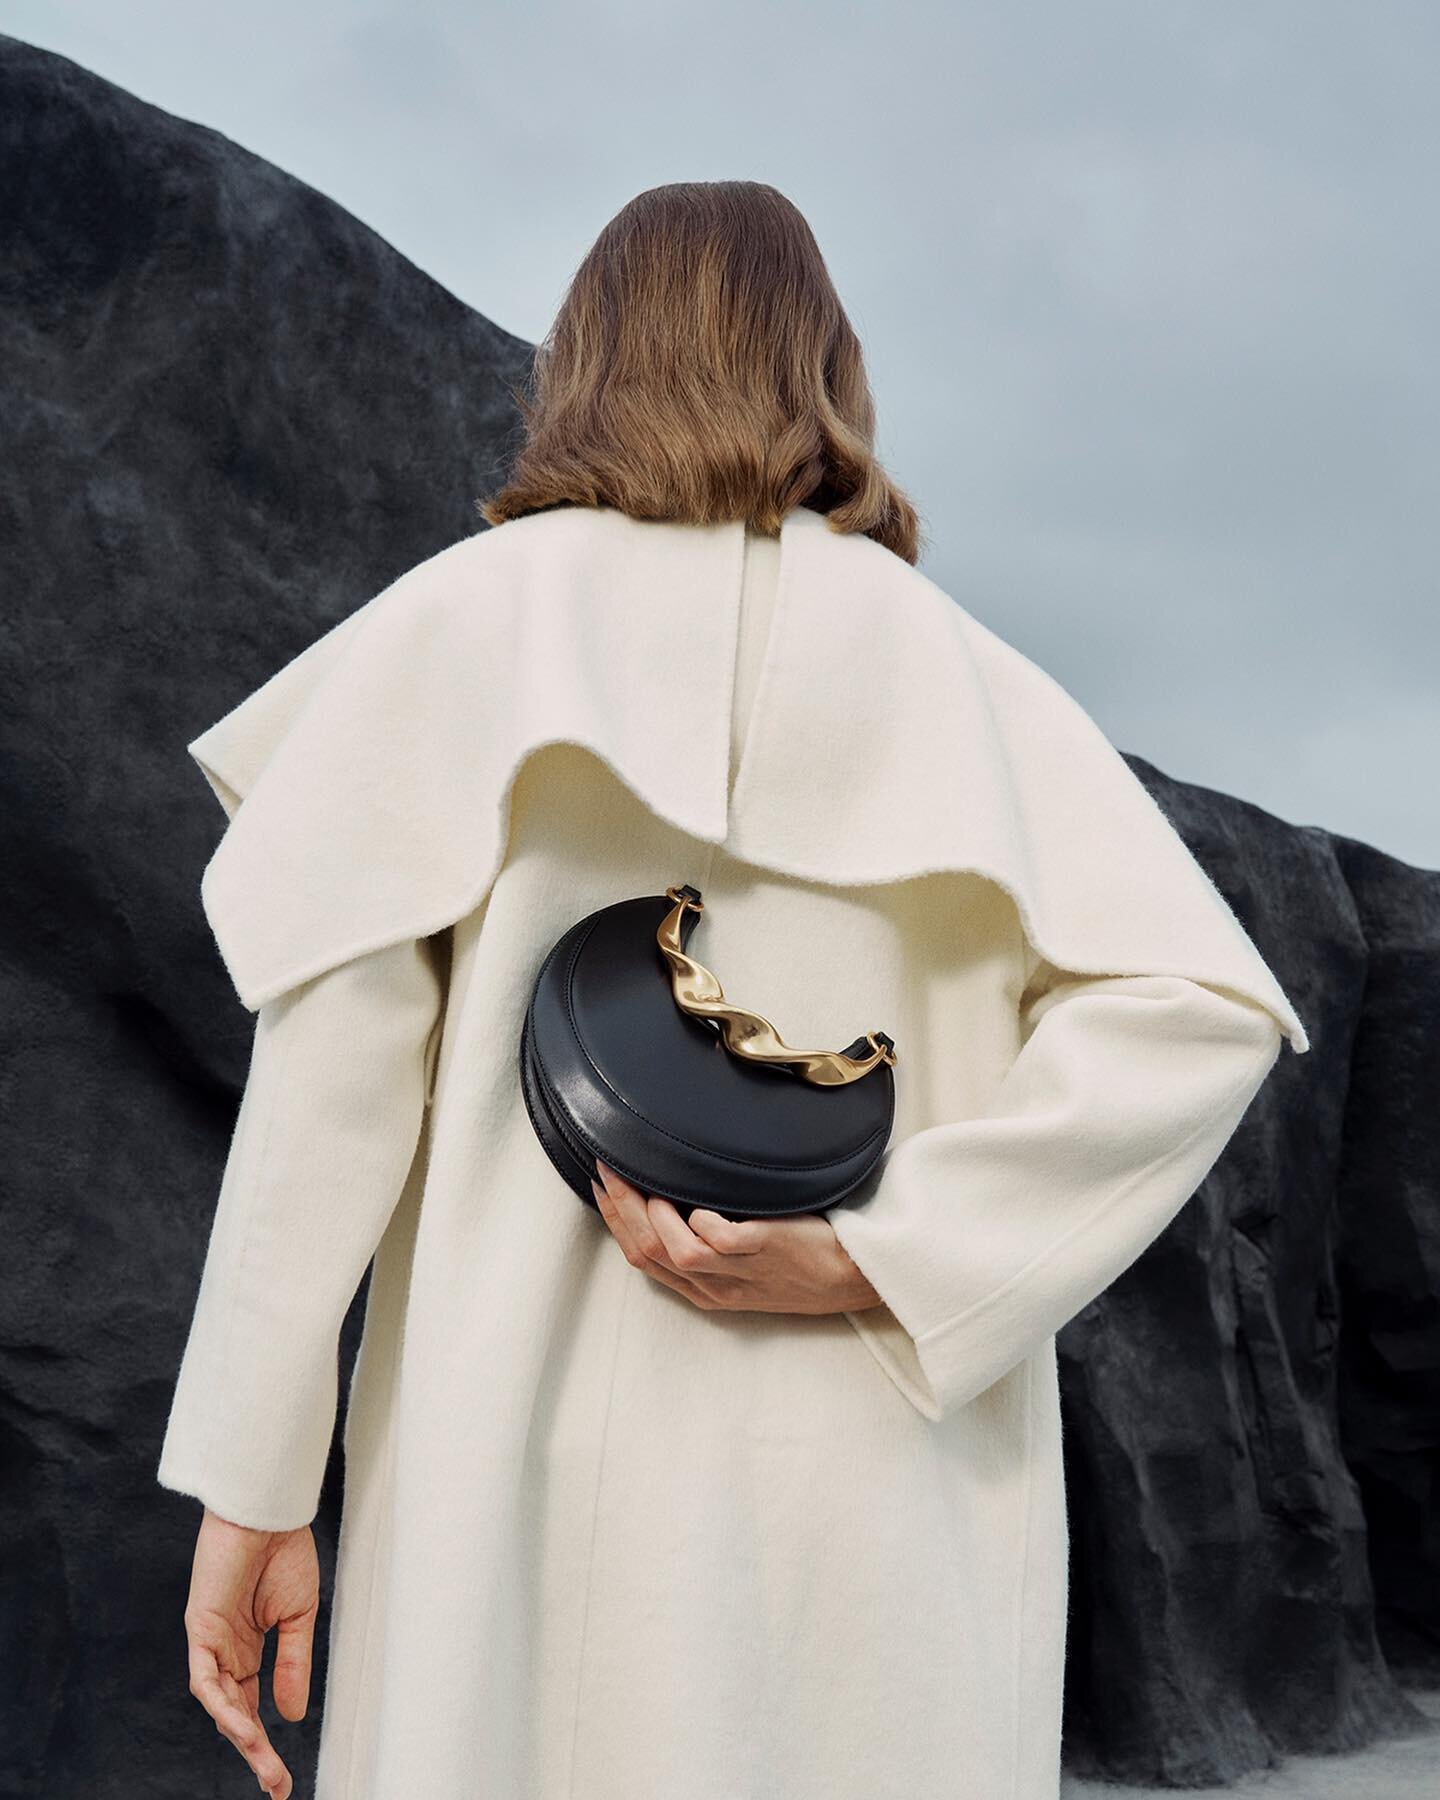 Sculptural Elegance: A Unique Interpretation of Beauty&quot; ✨👜✨
Immerse yourself in the artistic experience of our handbag, featuring a semi-circular sculptural silhouette that exudes timeless elegance.